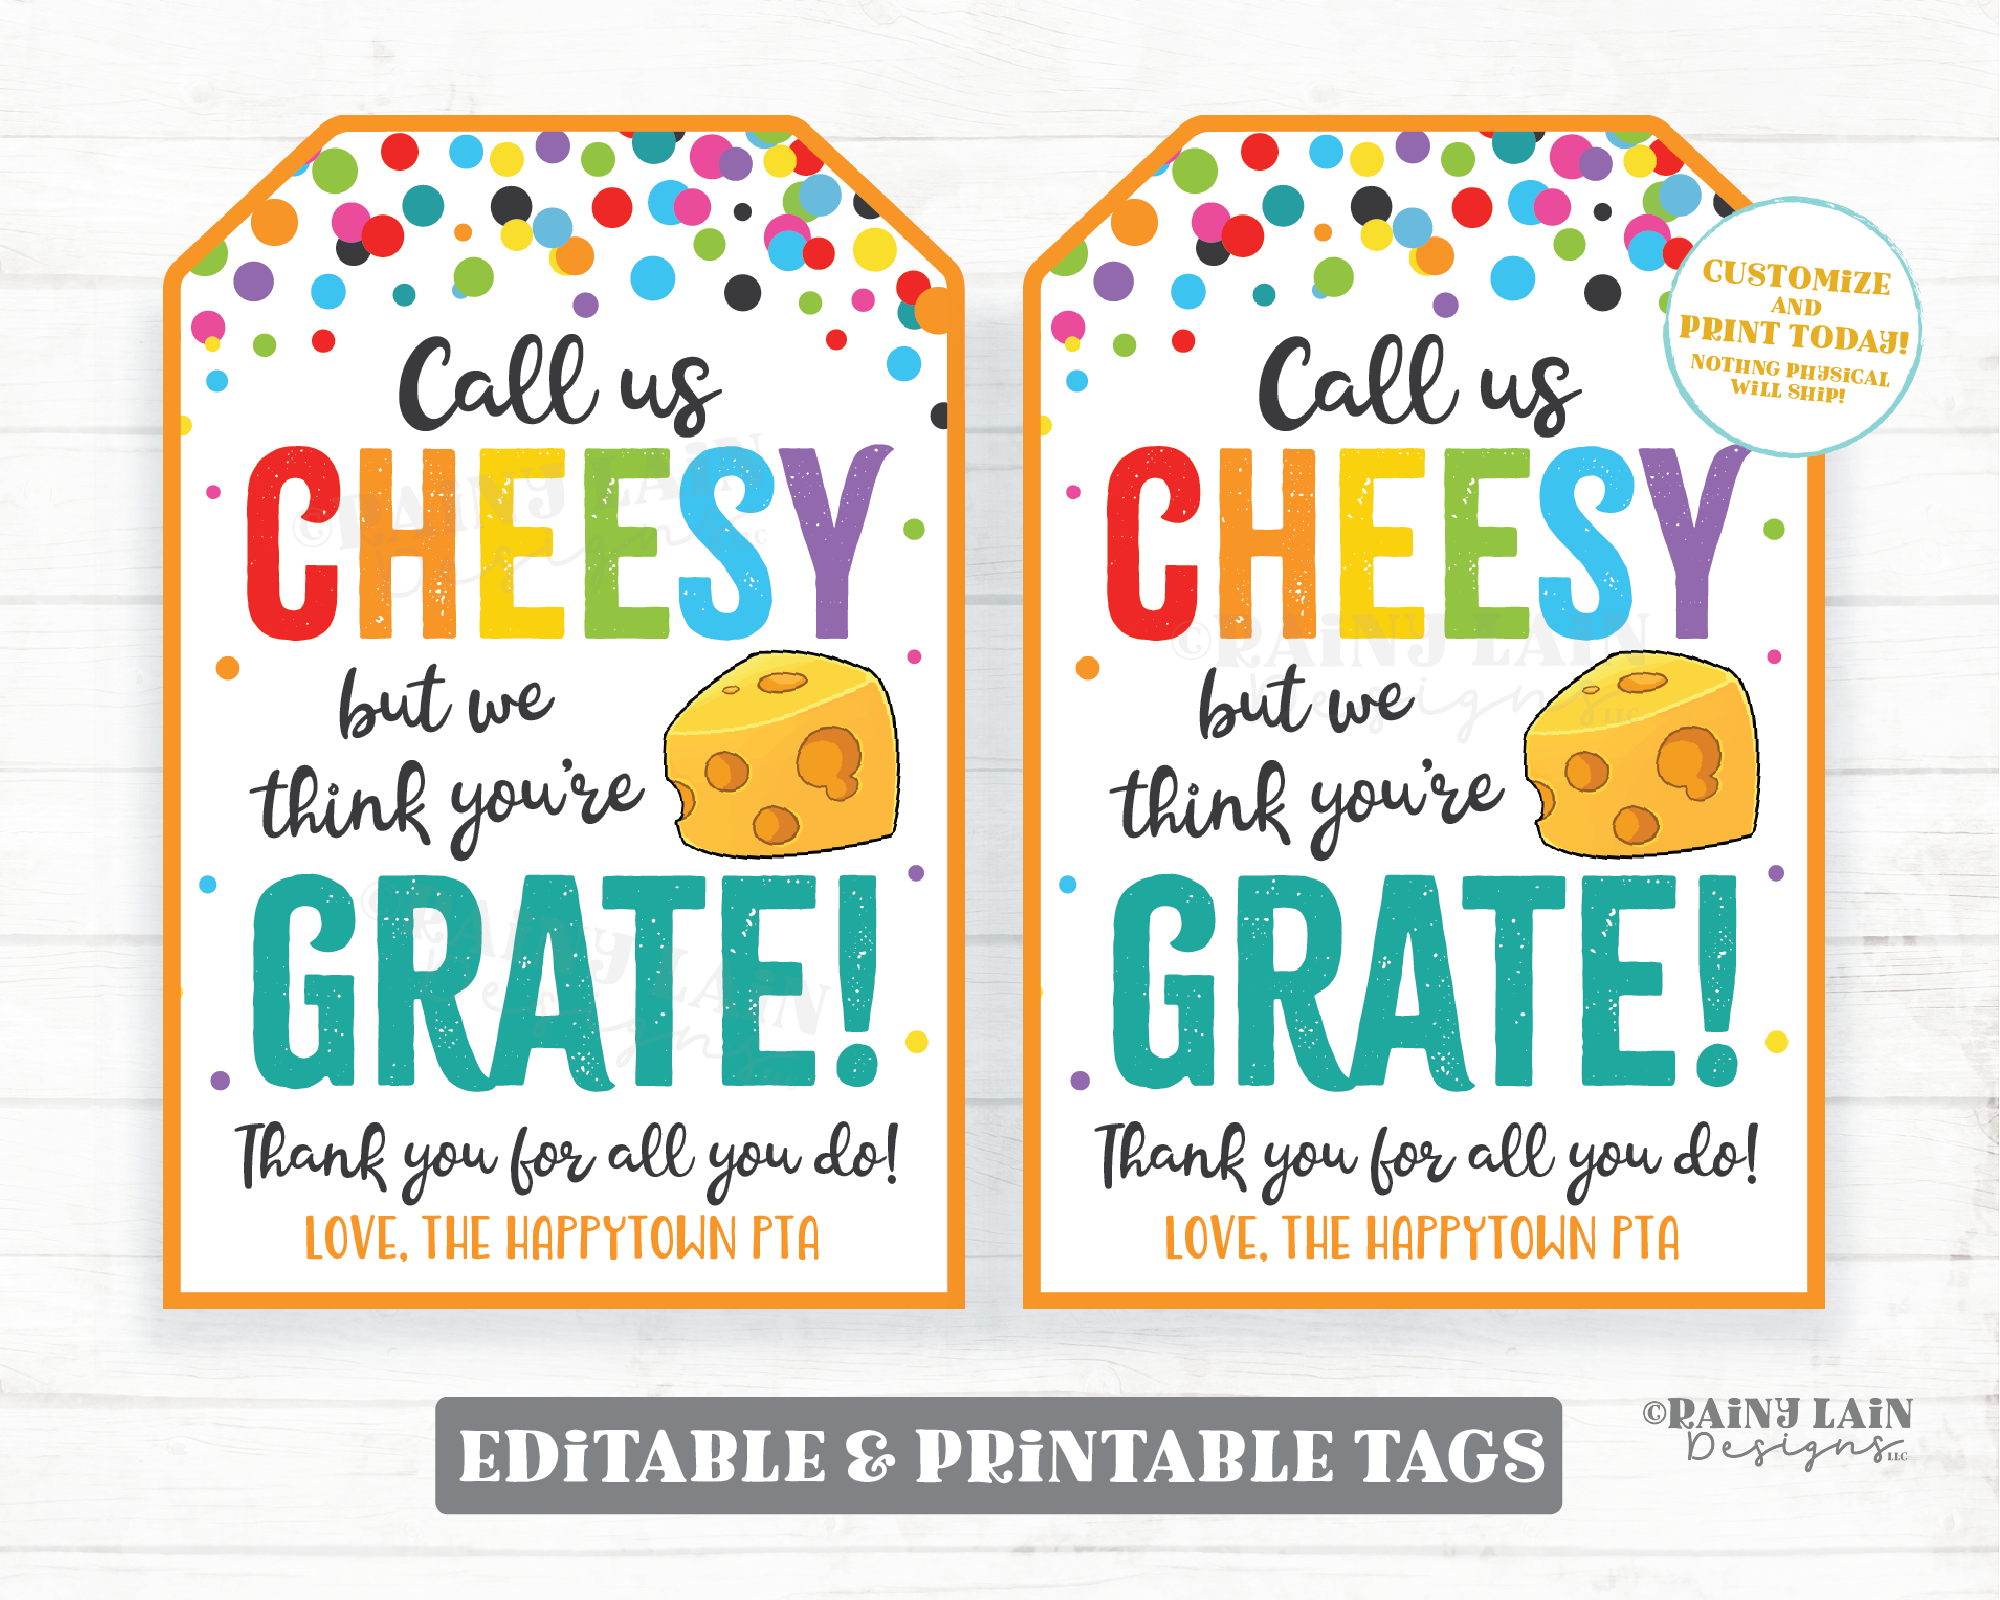 Cheese Gift Tag Call Us Cheesy We Think You're Grate Charcuterie Box Chips Crackers Thank you Employee Appreciation Staff Teacher PTO School